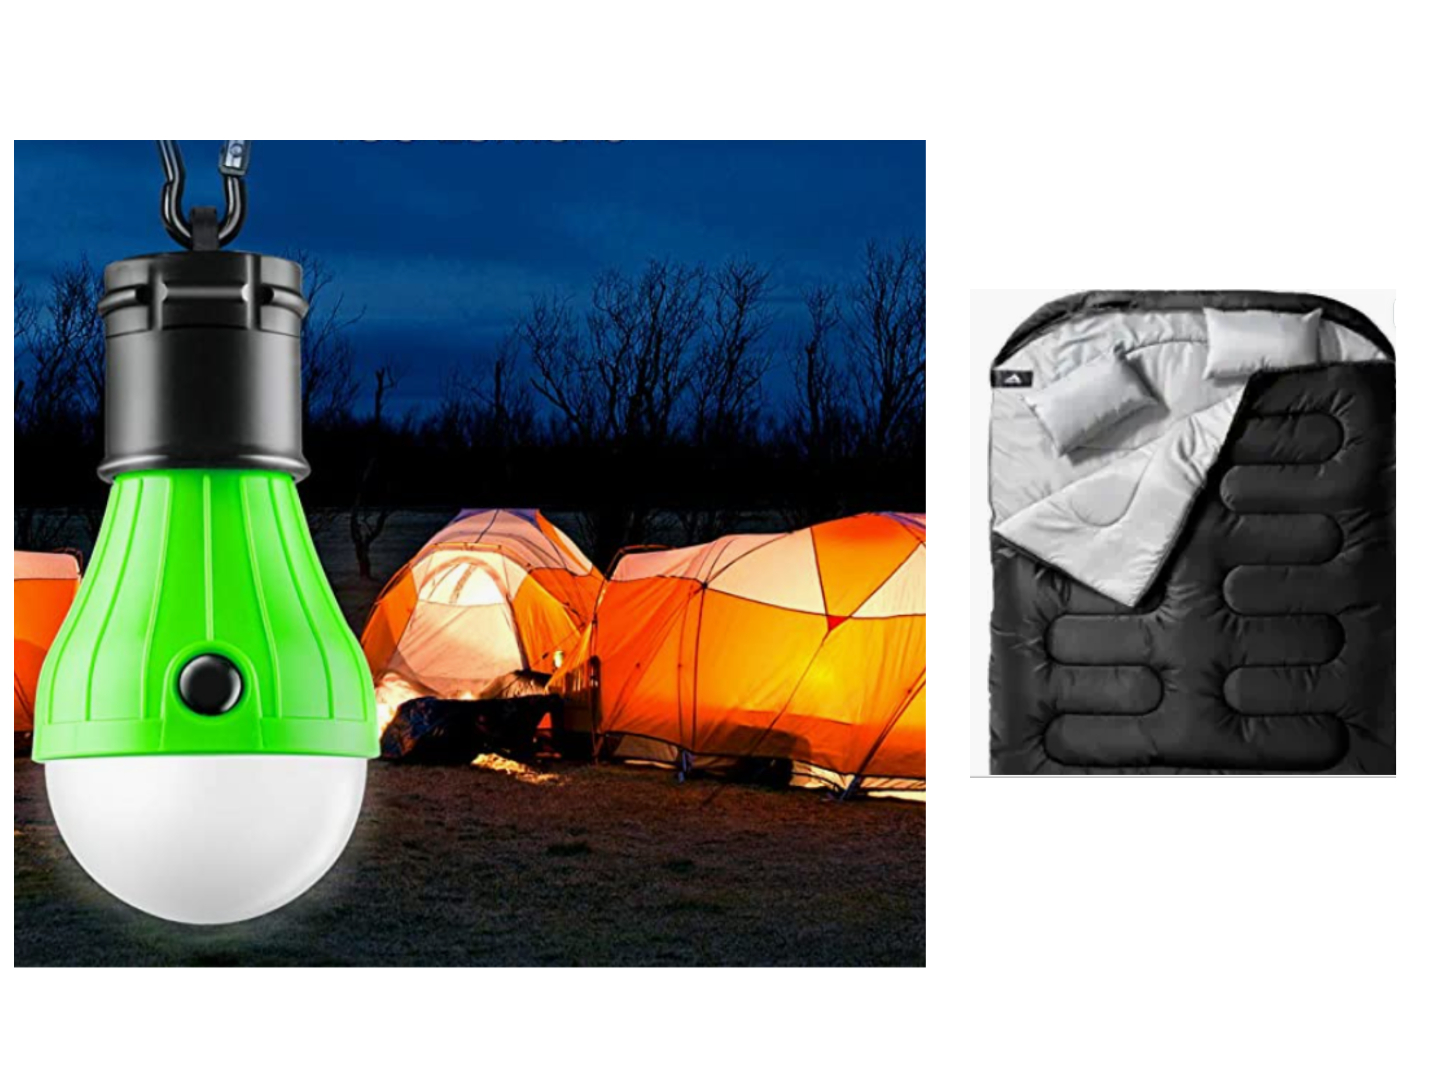 LED Camping Lantern, ct CAPETRONIX Rechargeable Camping Lights with 400lm 5 Light Modes Water-Resistant, Portable Tent Lights for Camping Power Outage